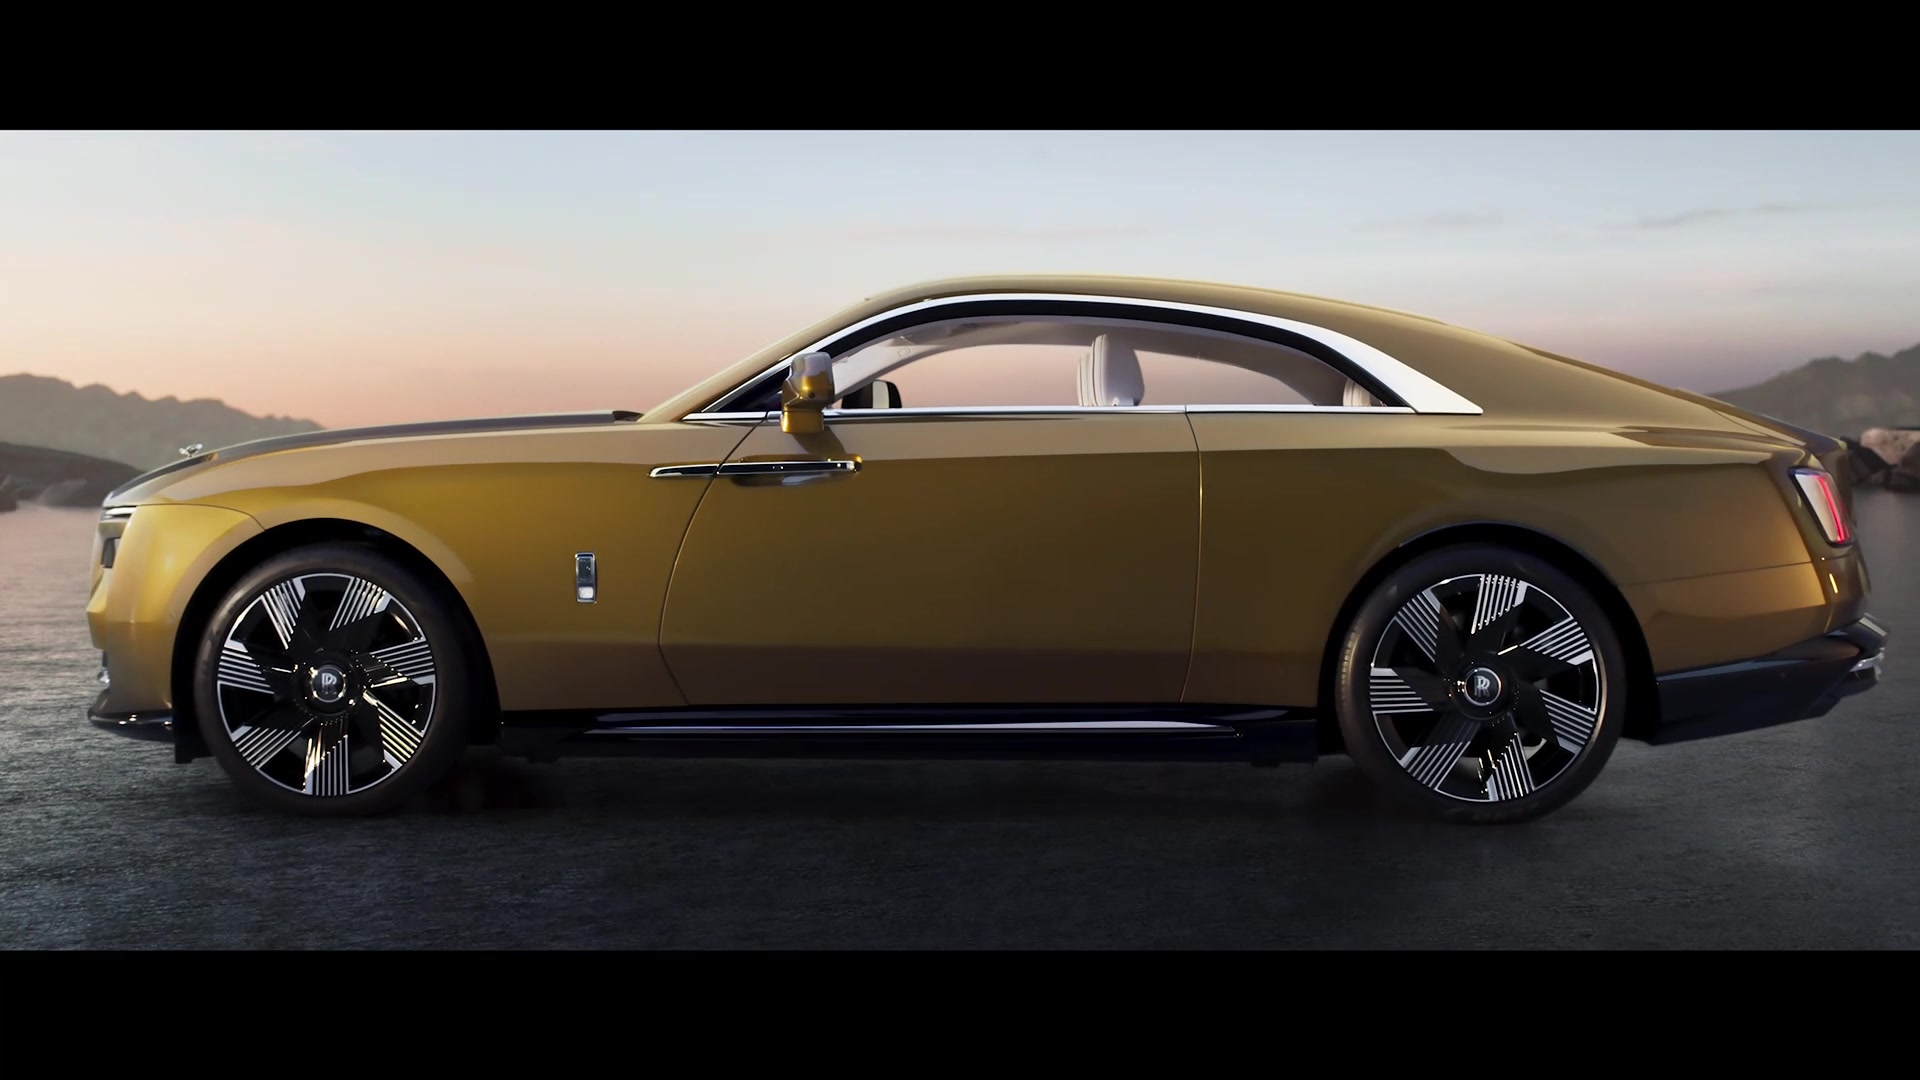 Rolls-Royce Spectre Unveiled – The first fully-electric Rolls-Royce – Brand film